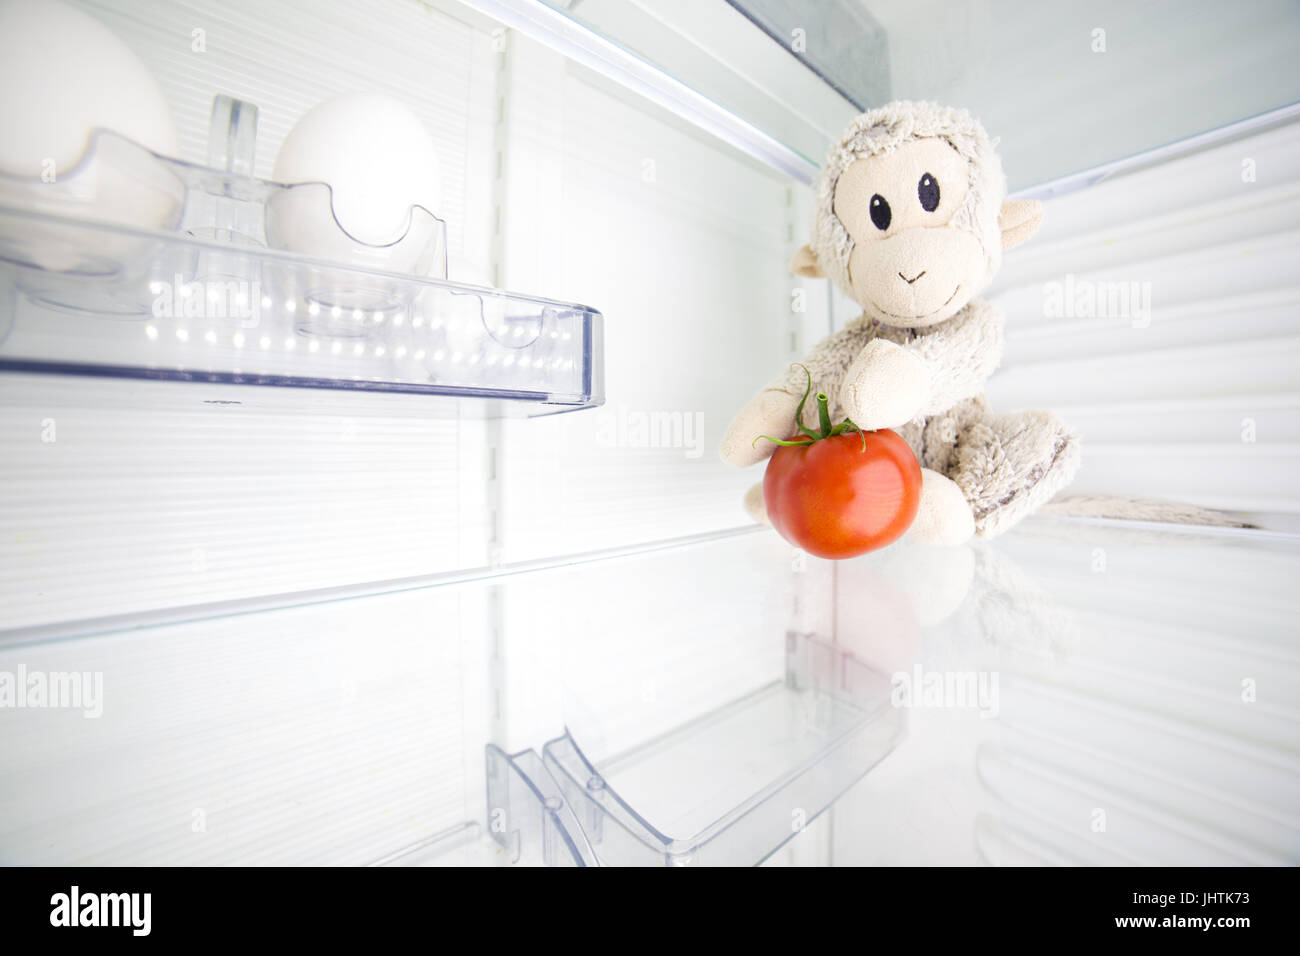 A monkey is holding a red tomato in the fridge. In the home. Stock Photo